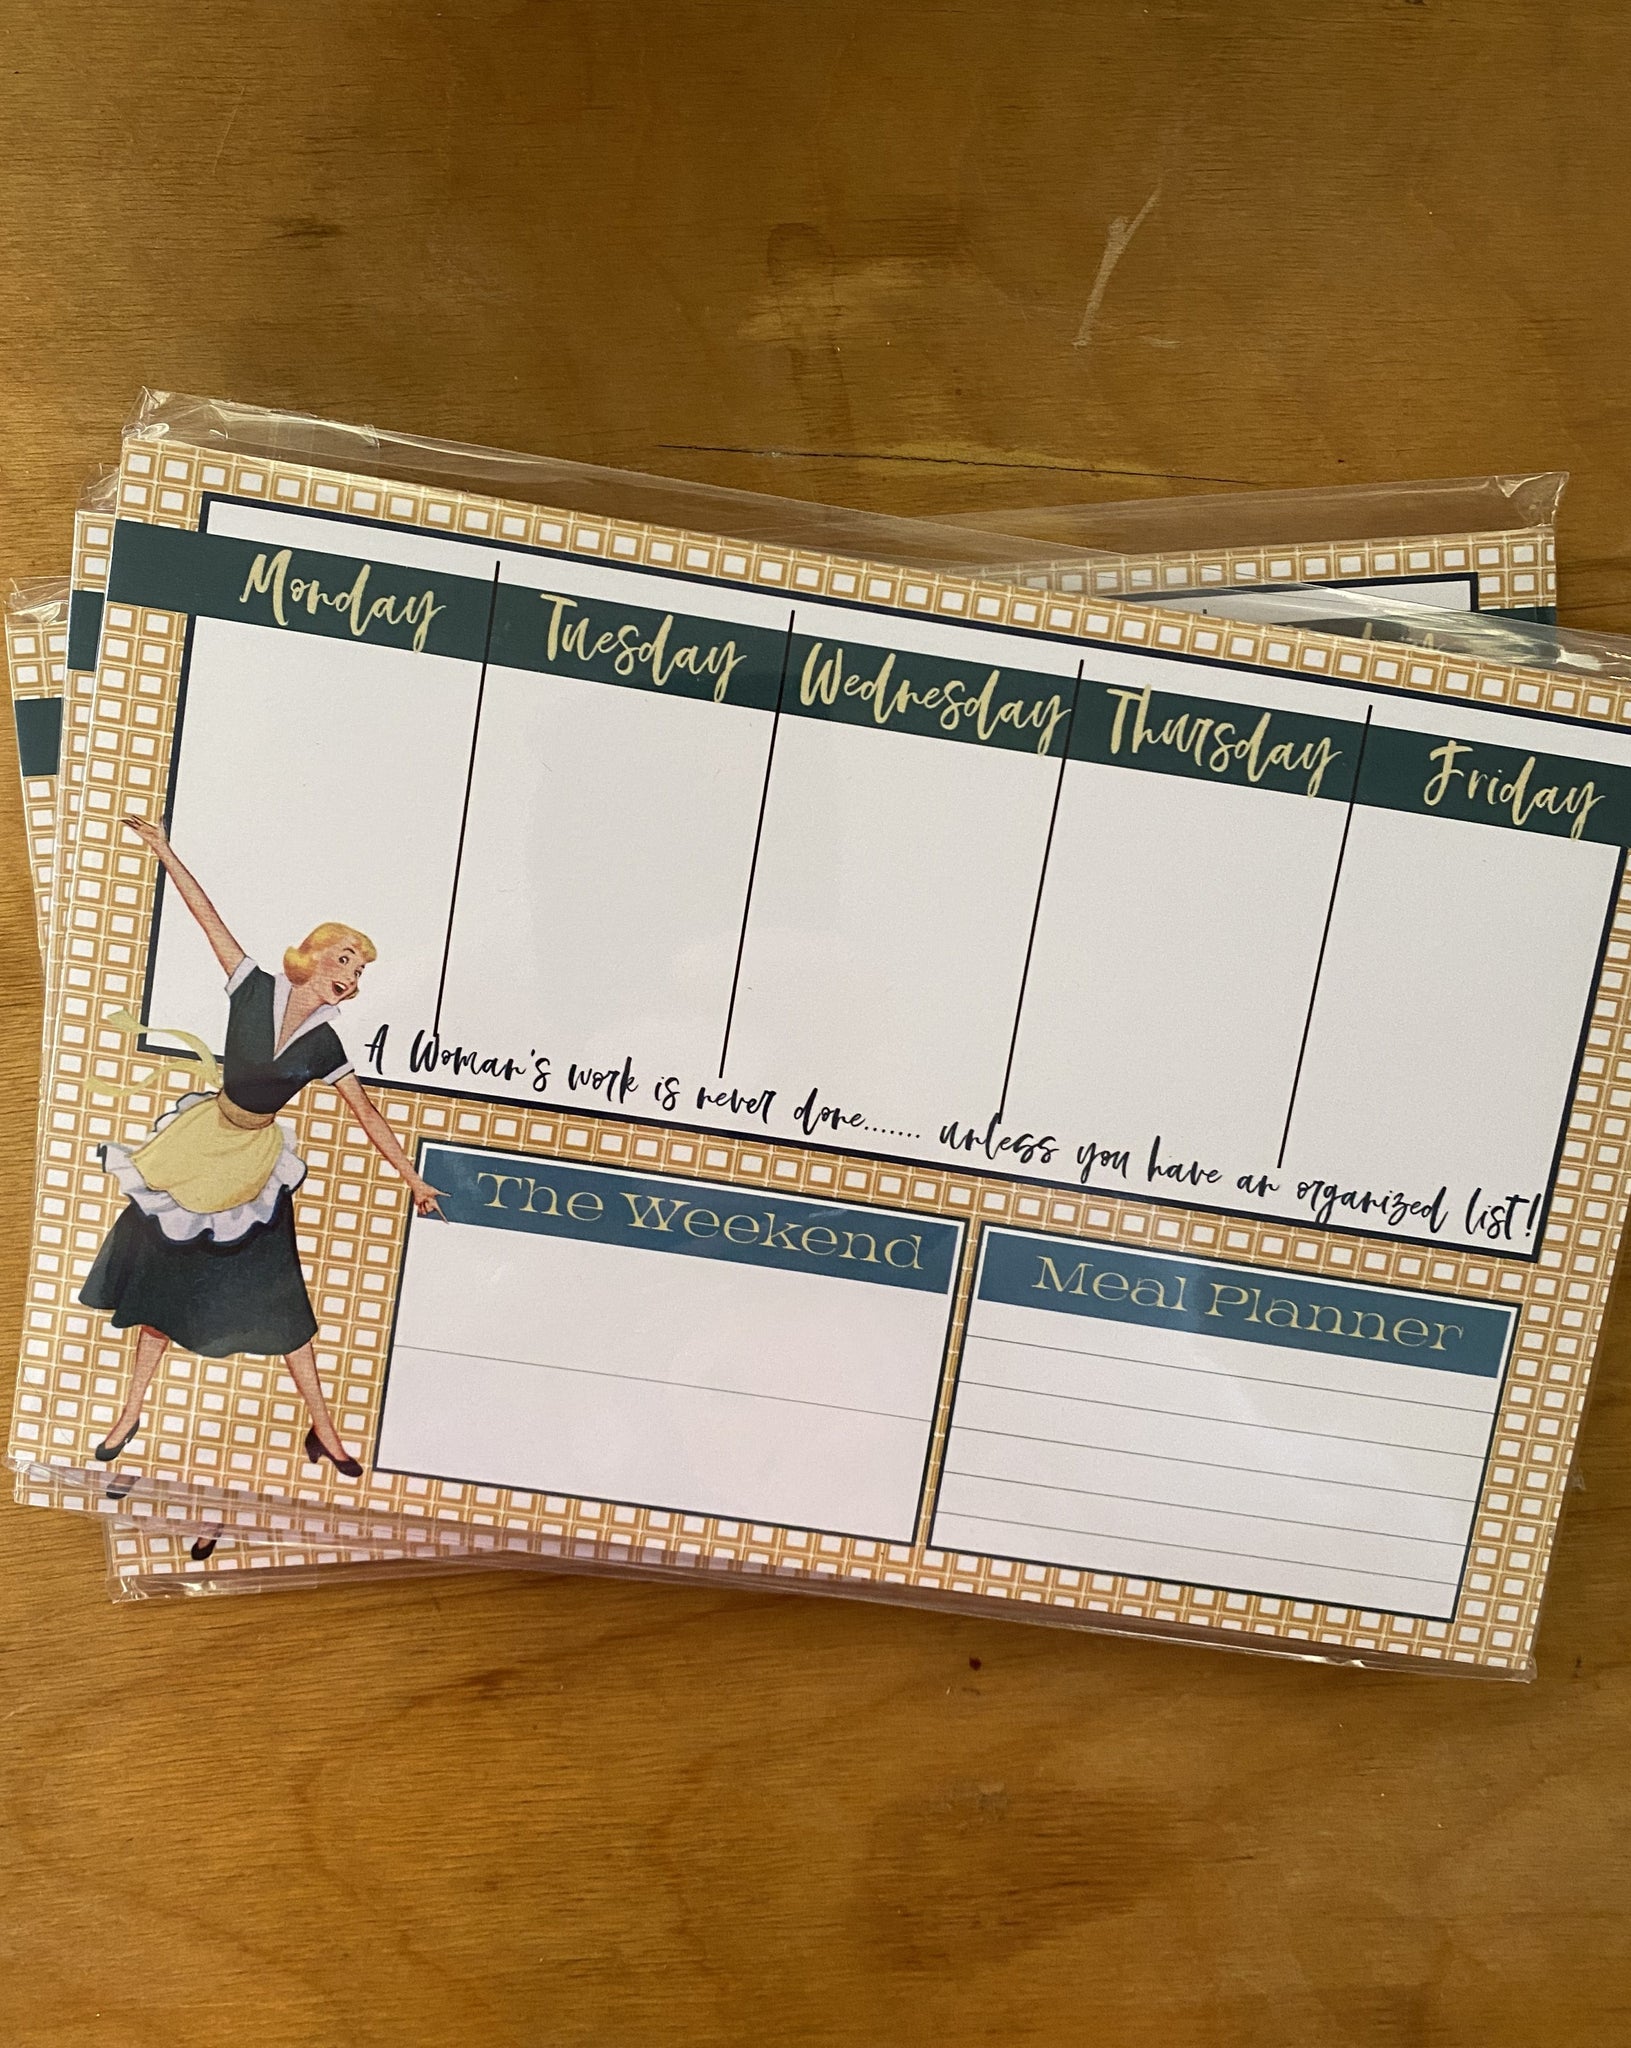 Retro Notepad Weekly Planner - Vintage Housewife To-Do List!